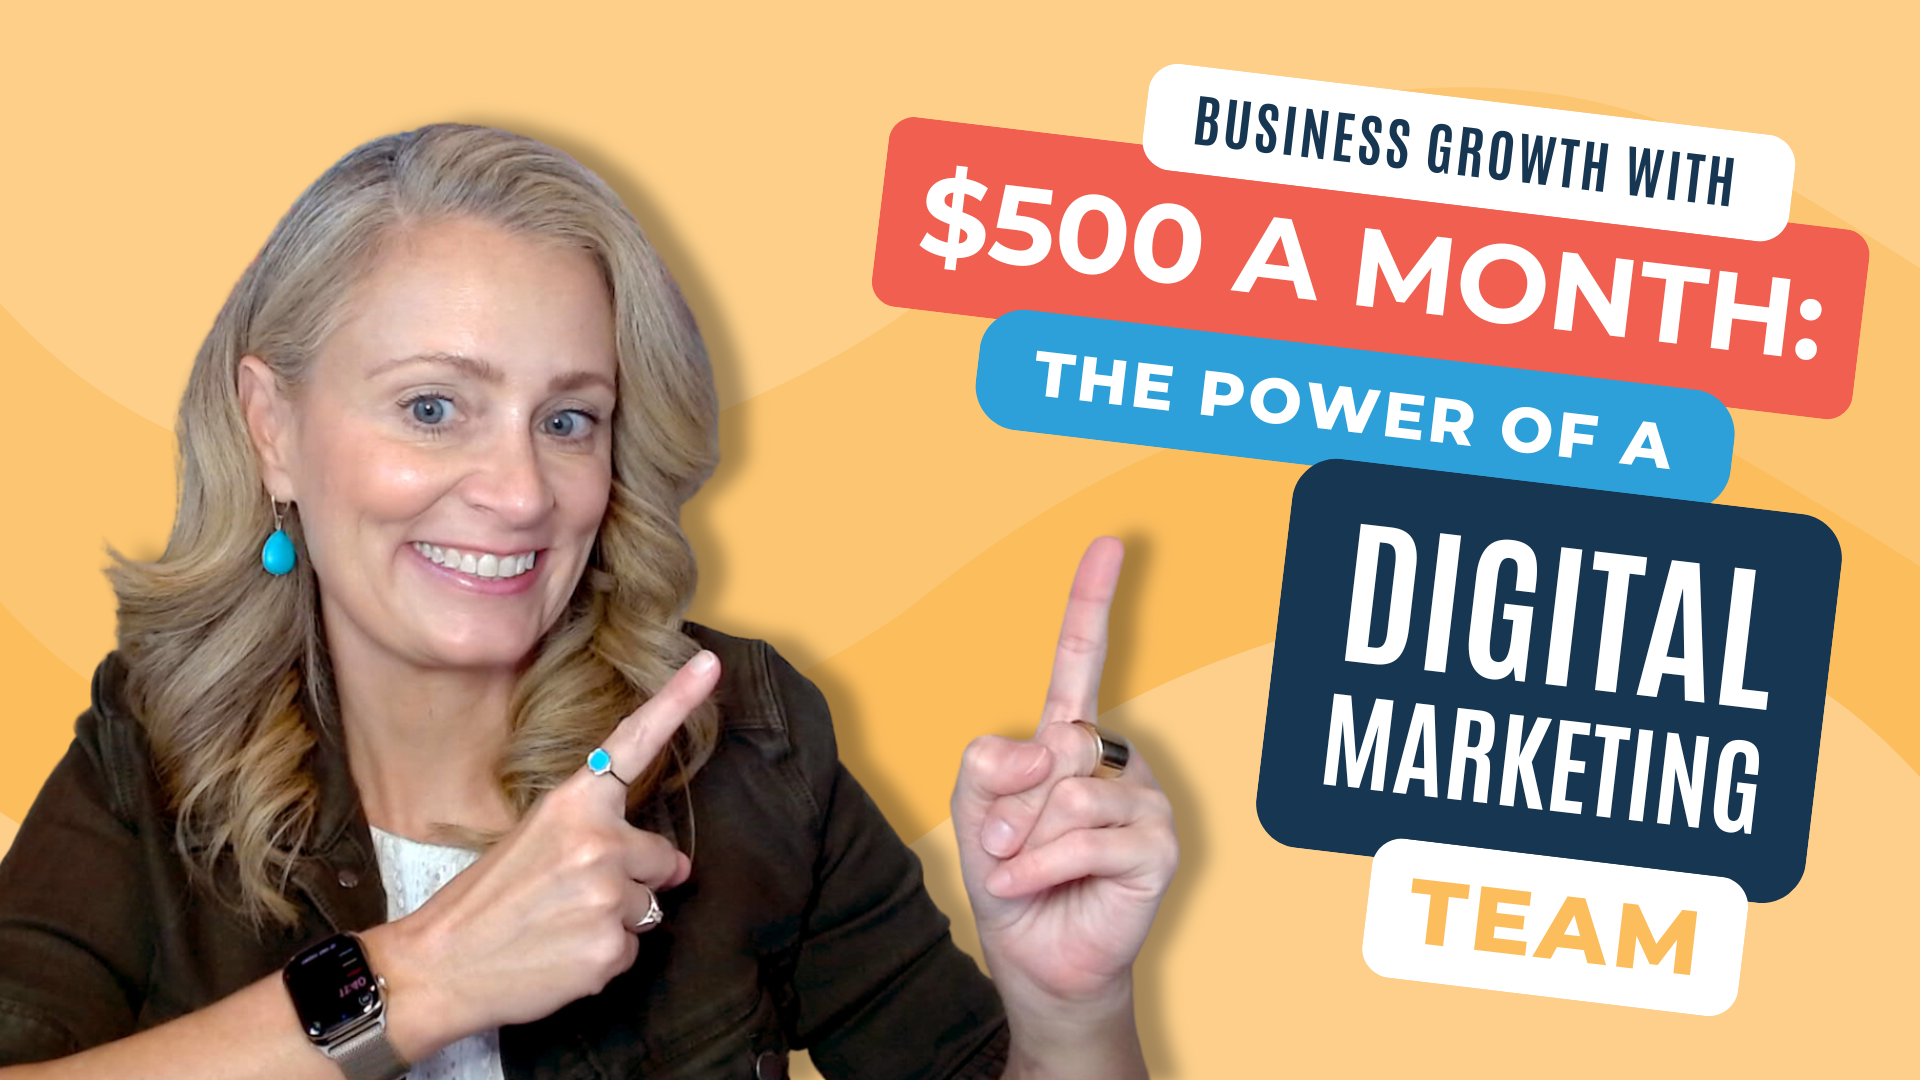 Business Growth with $500 a Month: The Power of a Virtual Digital Marketing Team